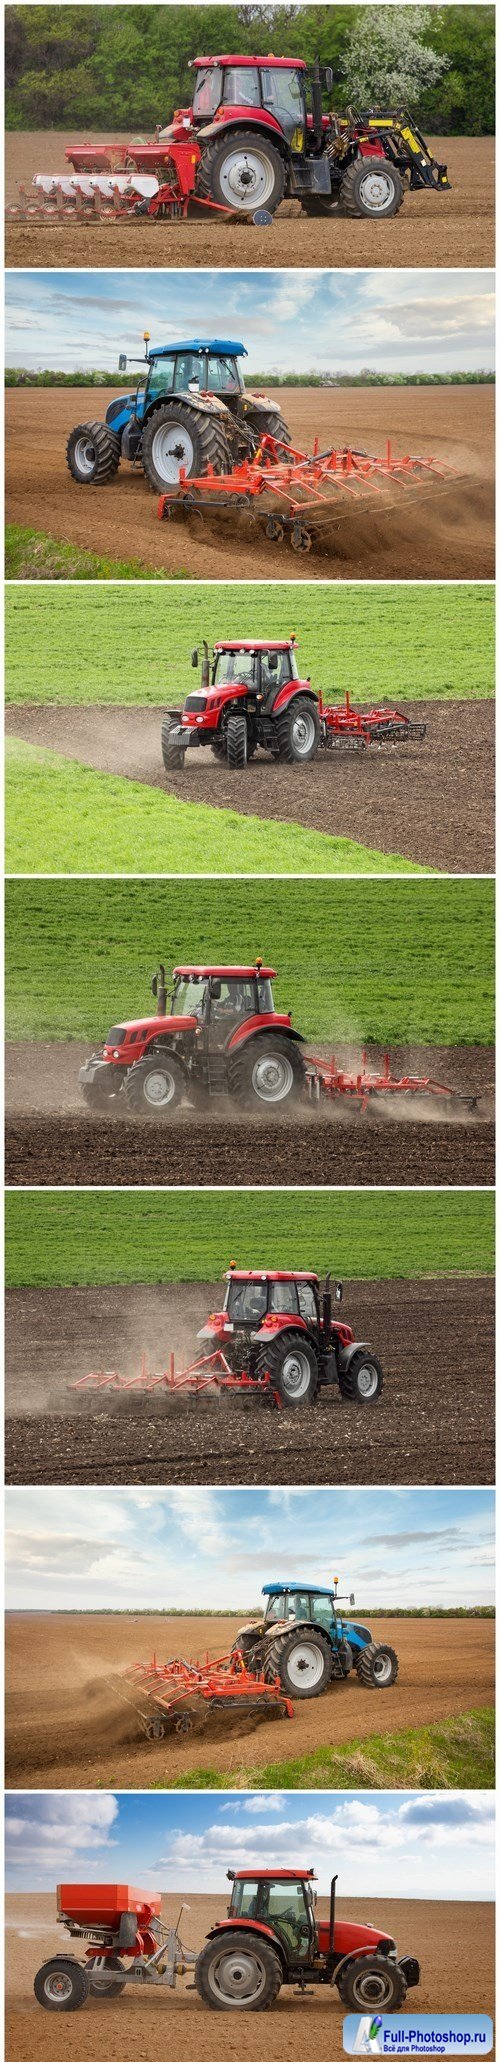 Small scale farming with tractor and plow in field - 7xUHQ JPEG Photo Stock